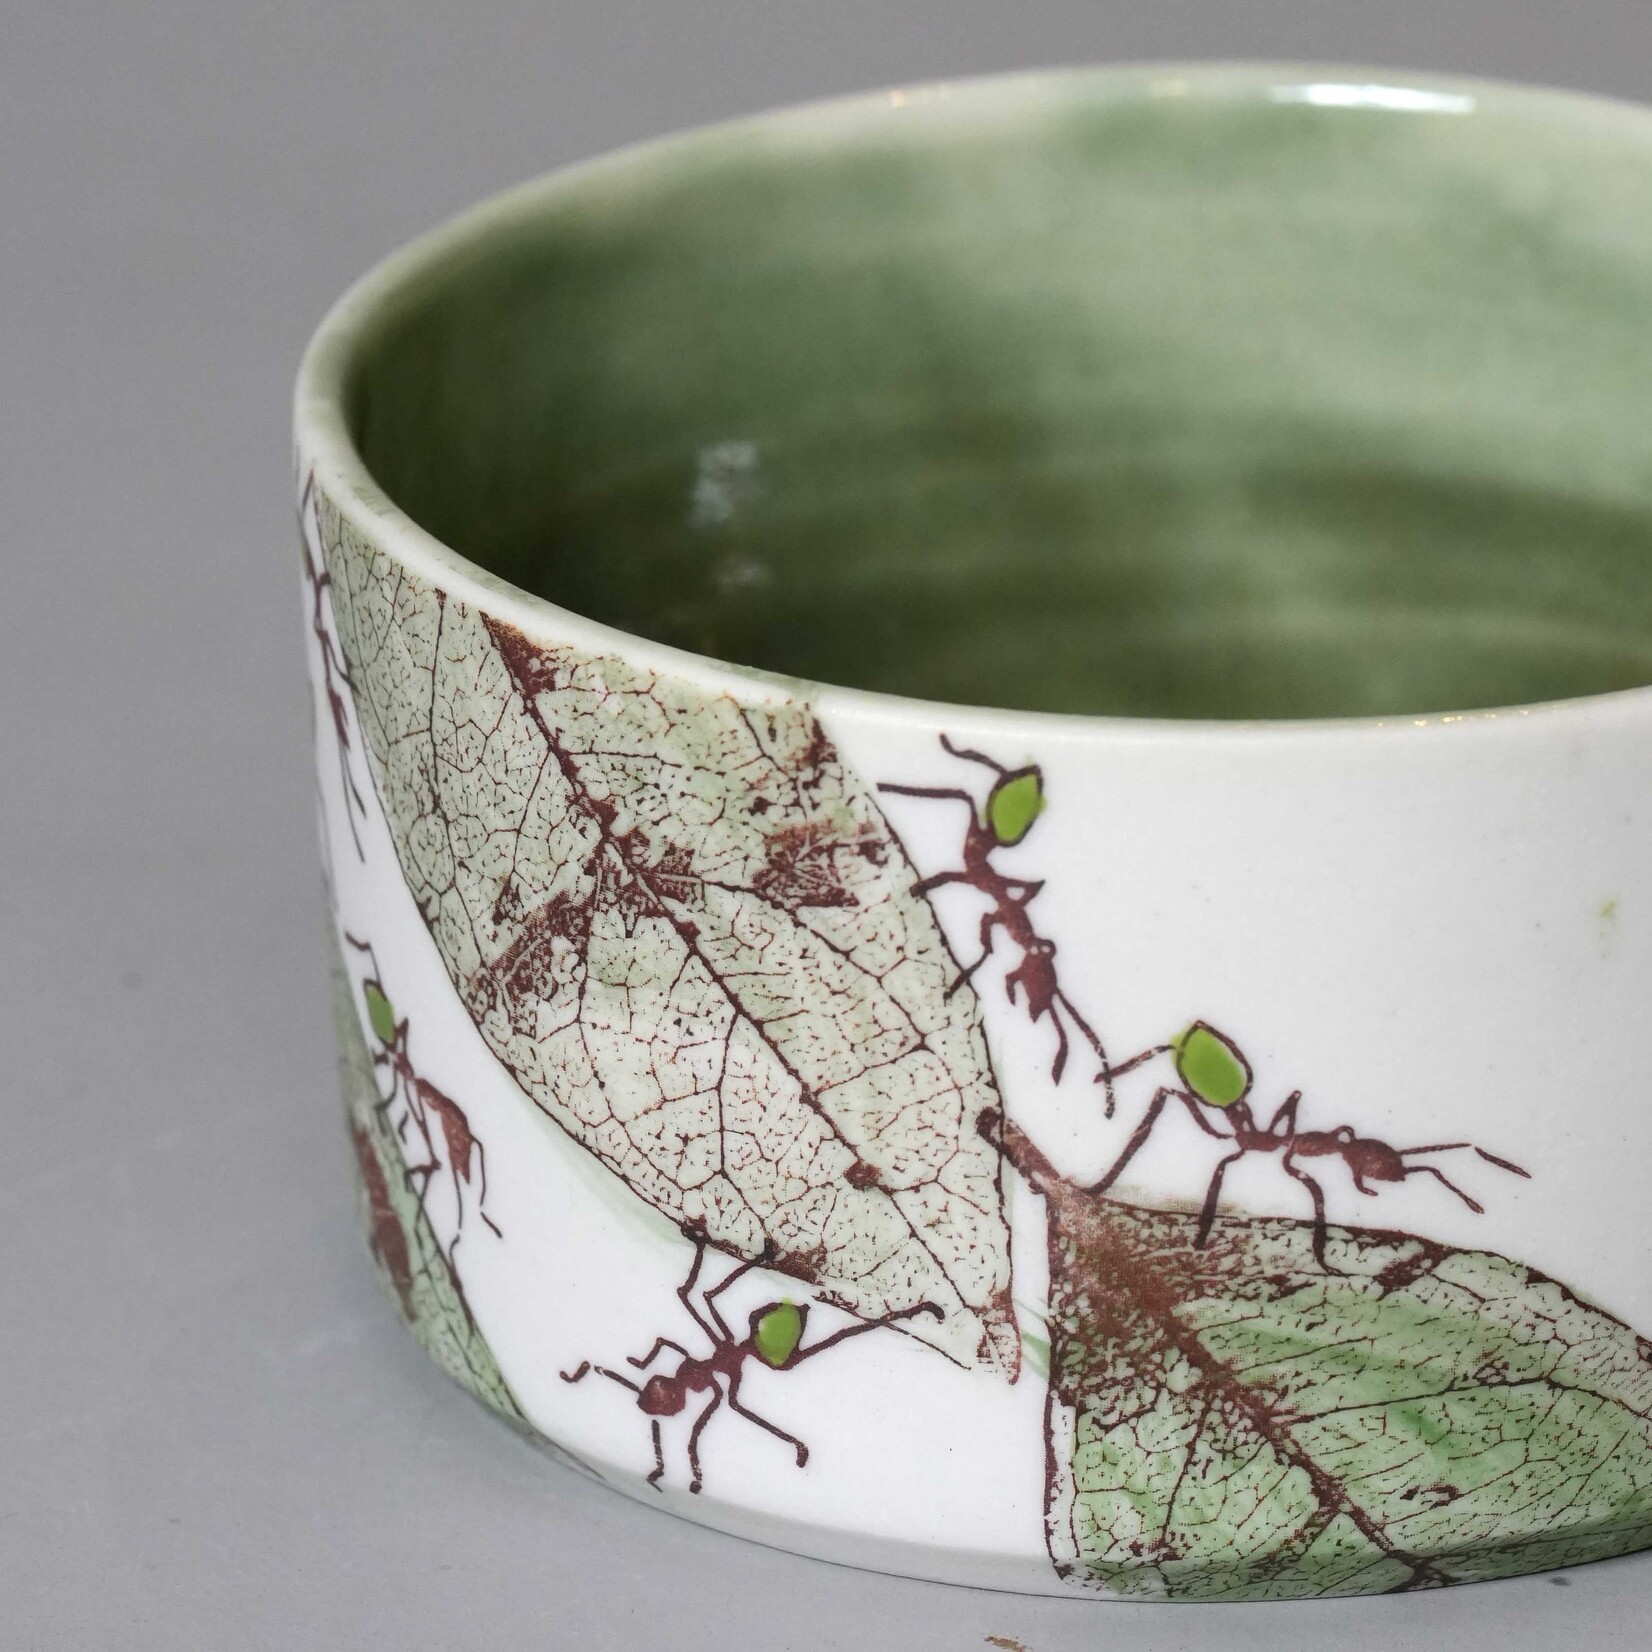 Mollie Bosworth, Bowl with Green Ants | Porcelain